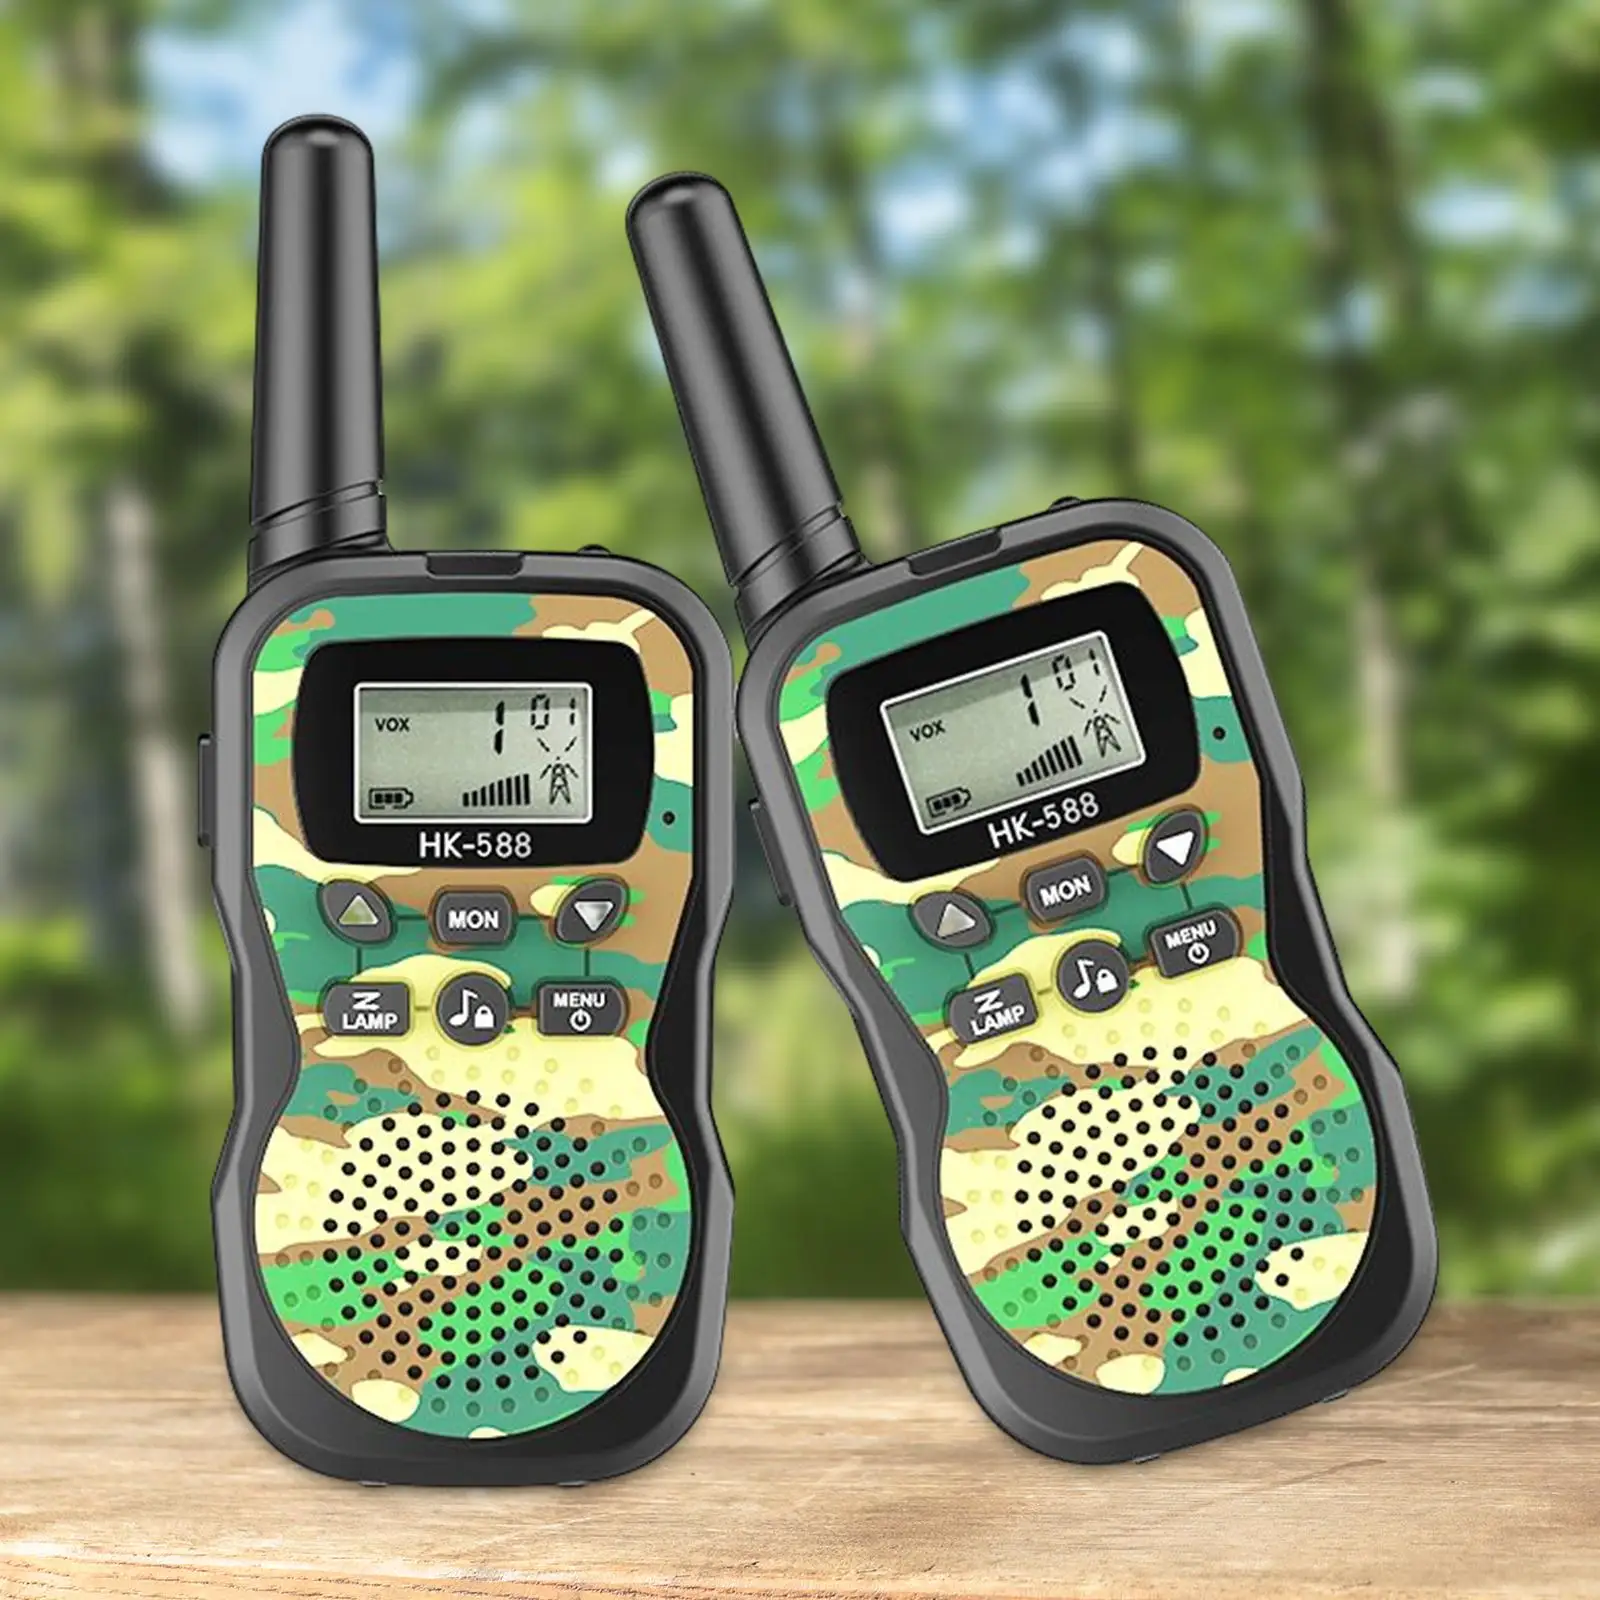 Portable Kids Walkie Toys Interphone 2 Way Radios Children Toy for Camping,